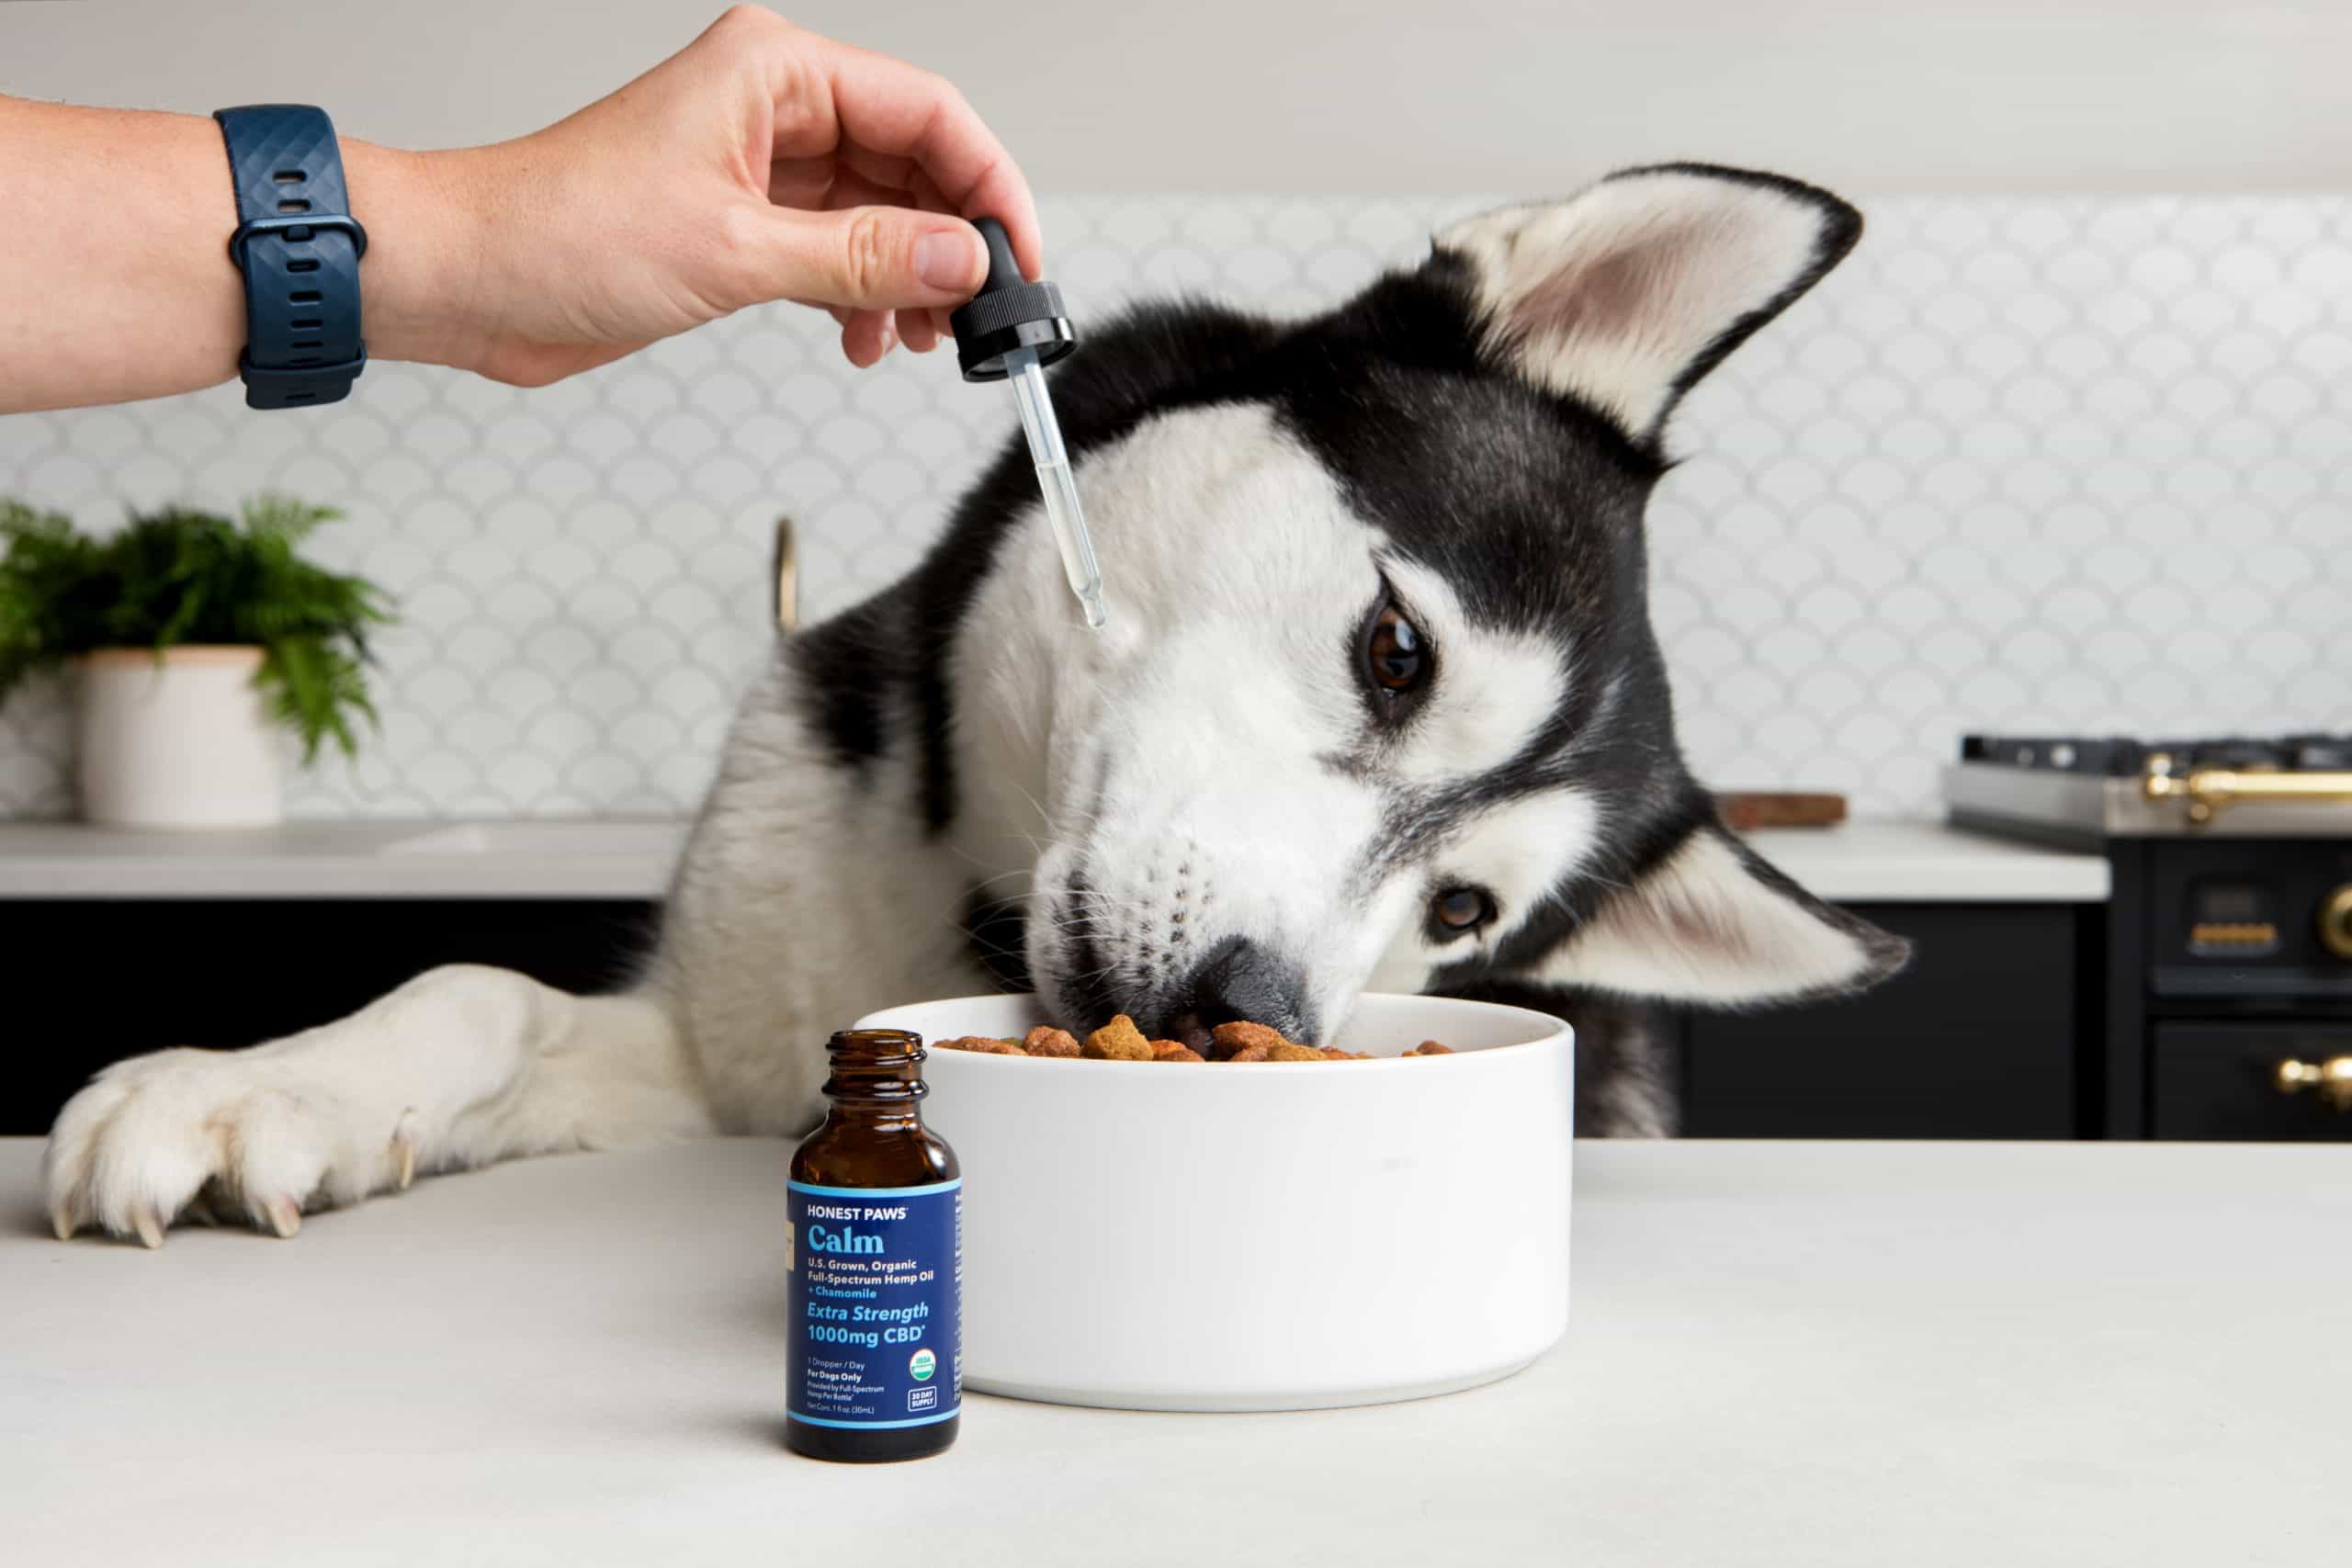 CBD oil for pets: what you need to know